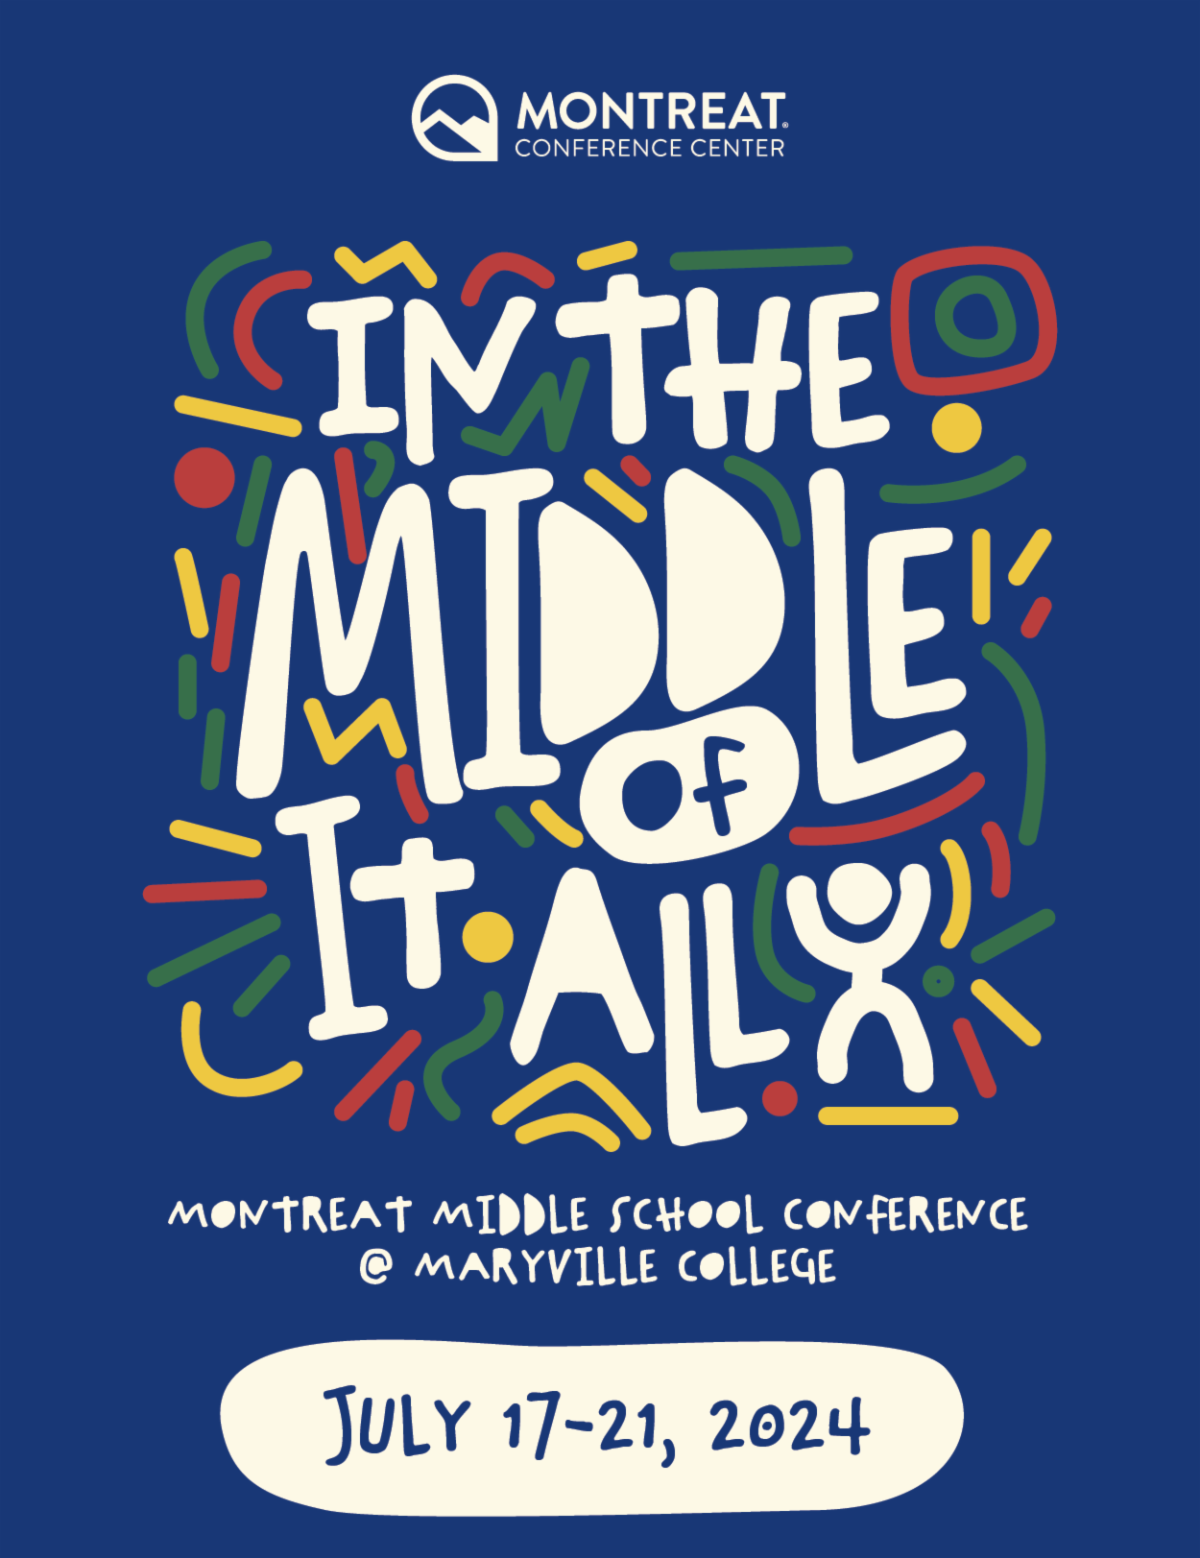 "In the Middle of It All" Montreat Middle School Conference - July 17-21, 2024.